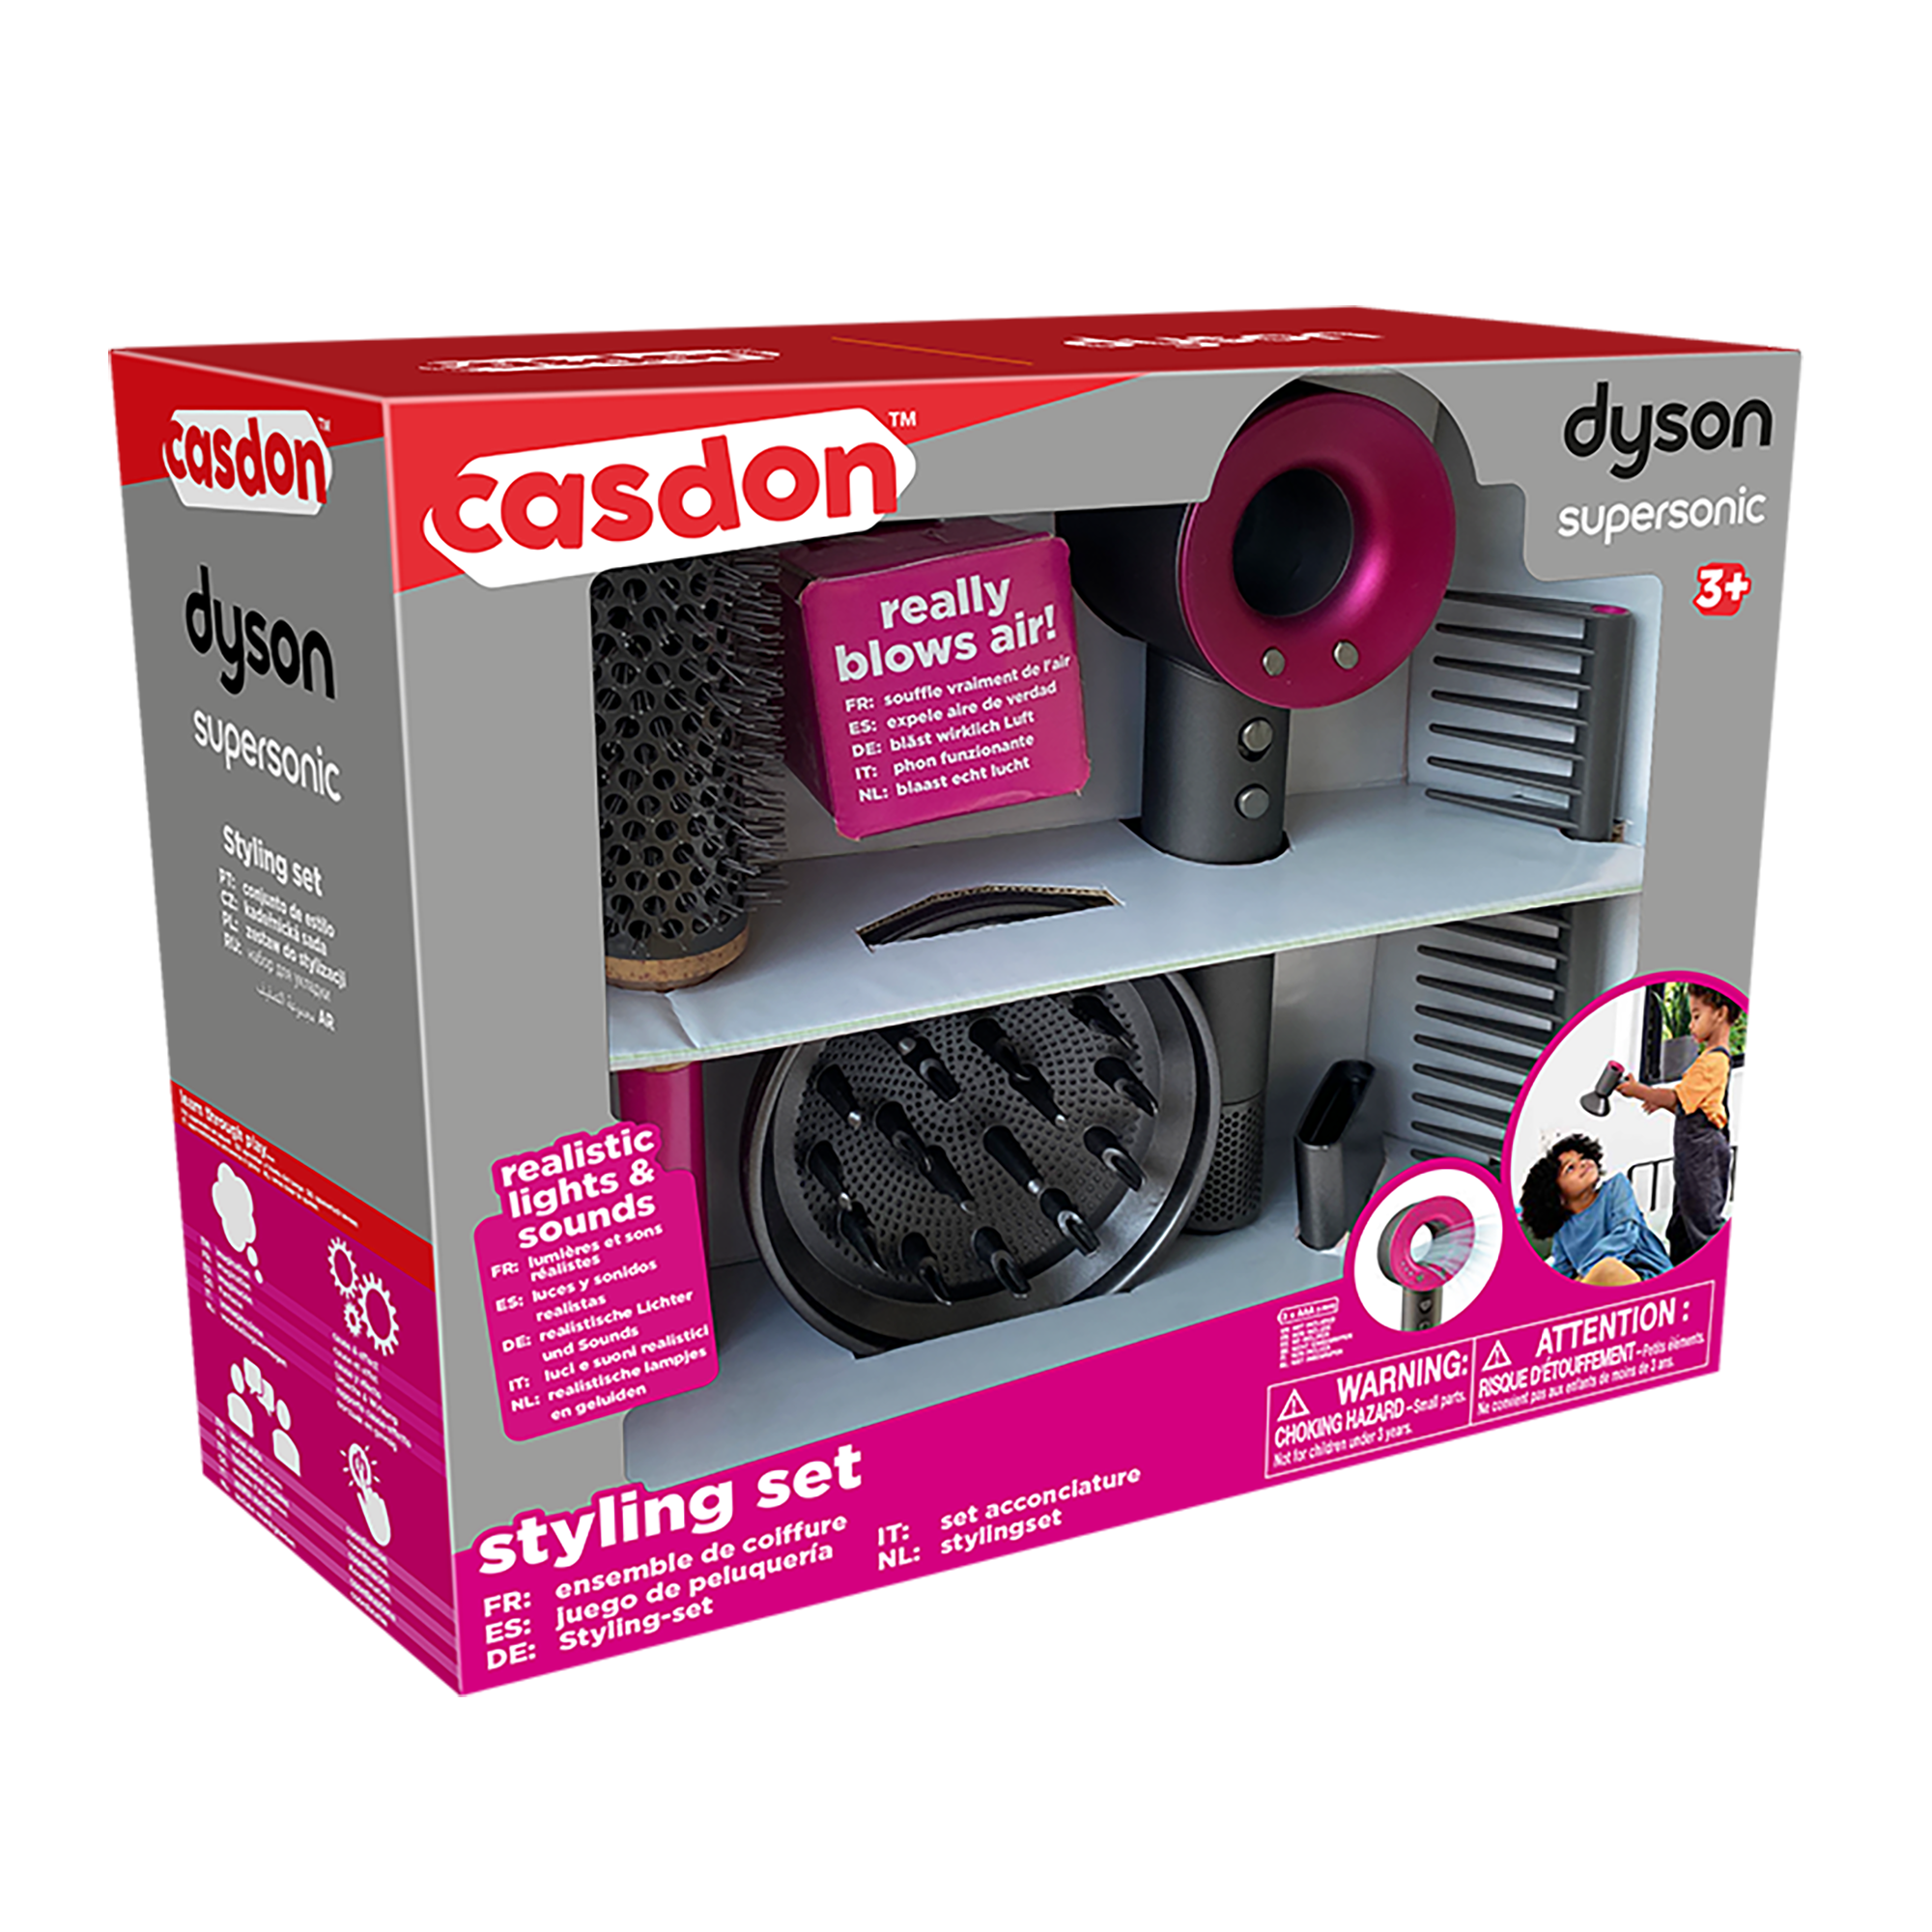 Dyson supersonic styling set - 